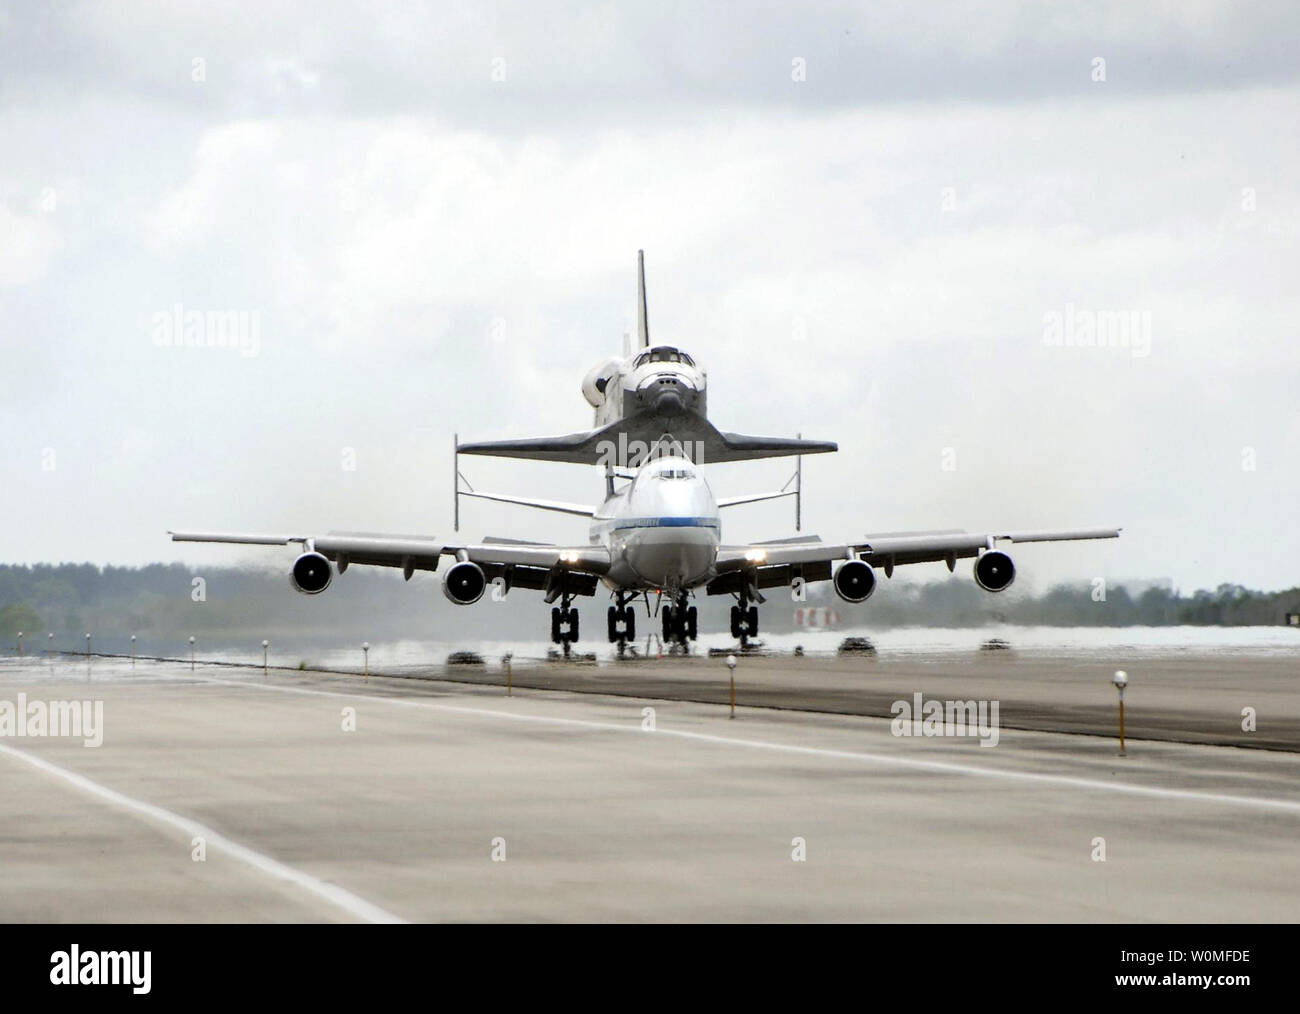 Space shuttle Discovery sits atop the Boeing 747 Shuttle Carrier Aircraft as it touched down at NASA's Kennedy Space Center in Florida on September 21, 2009. The two-day return flight from Edwards Air Force Base in California began at 9:20 a.m. EDT Sept. 20. After three fueling stops that included an overnight stay in Louisiana, the piggybacked shuttle had to navigate through a line of showers across Louisiana and around Kennedy.     UPI/NASA Stock Photo